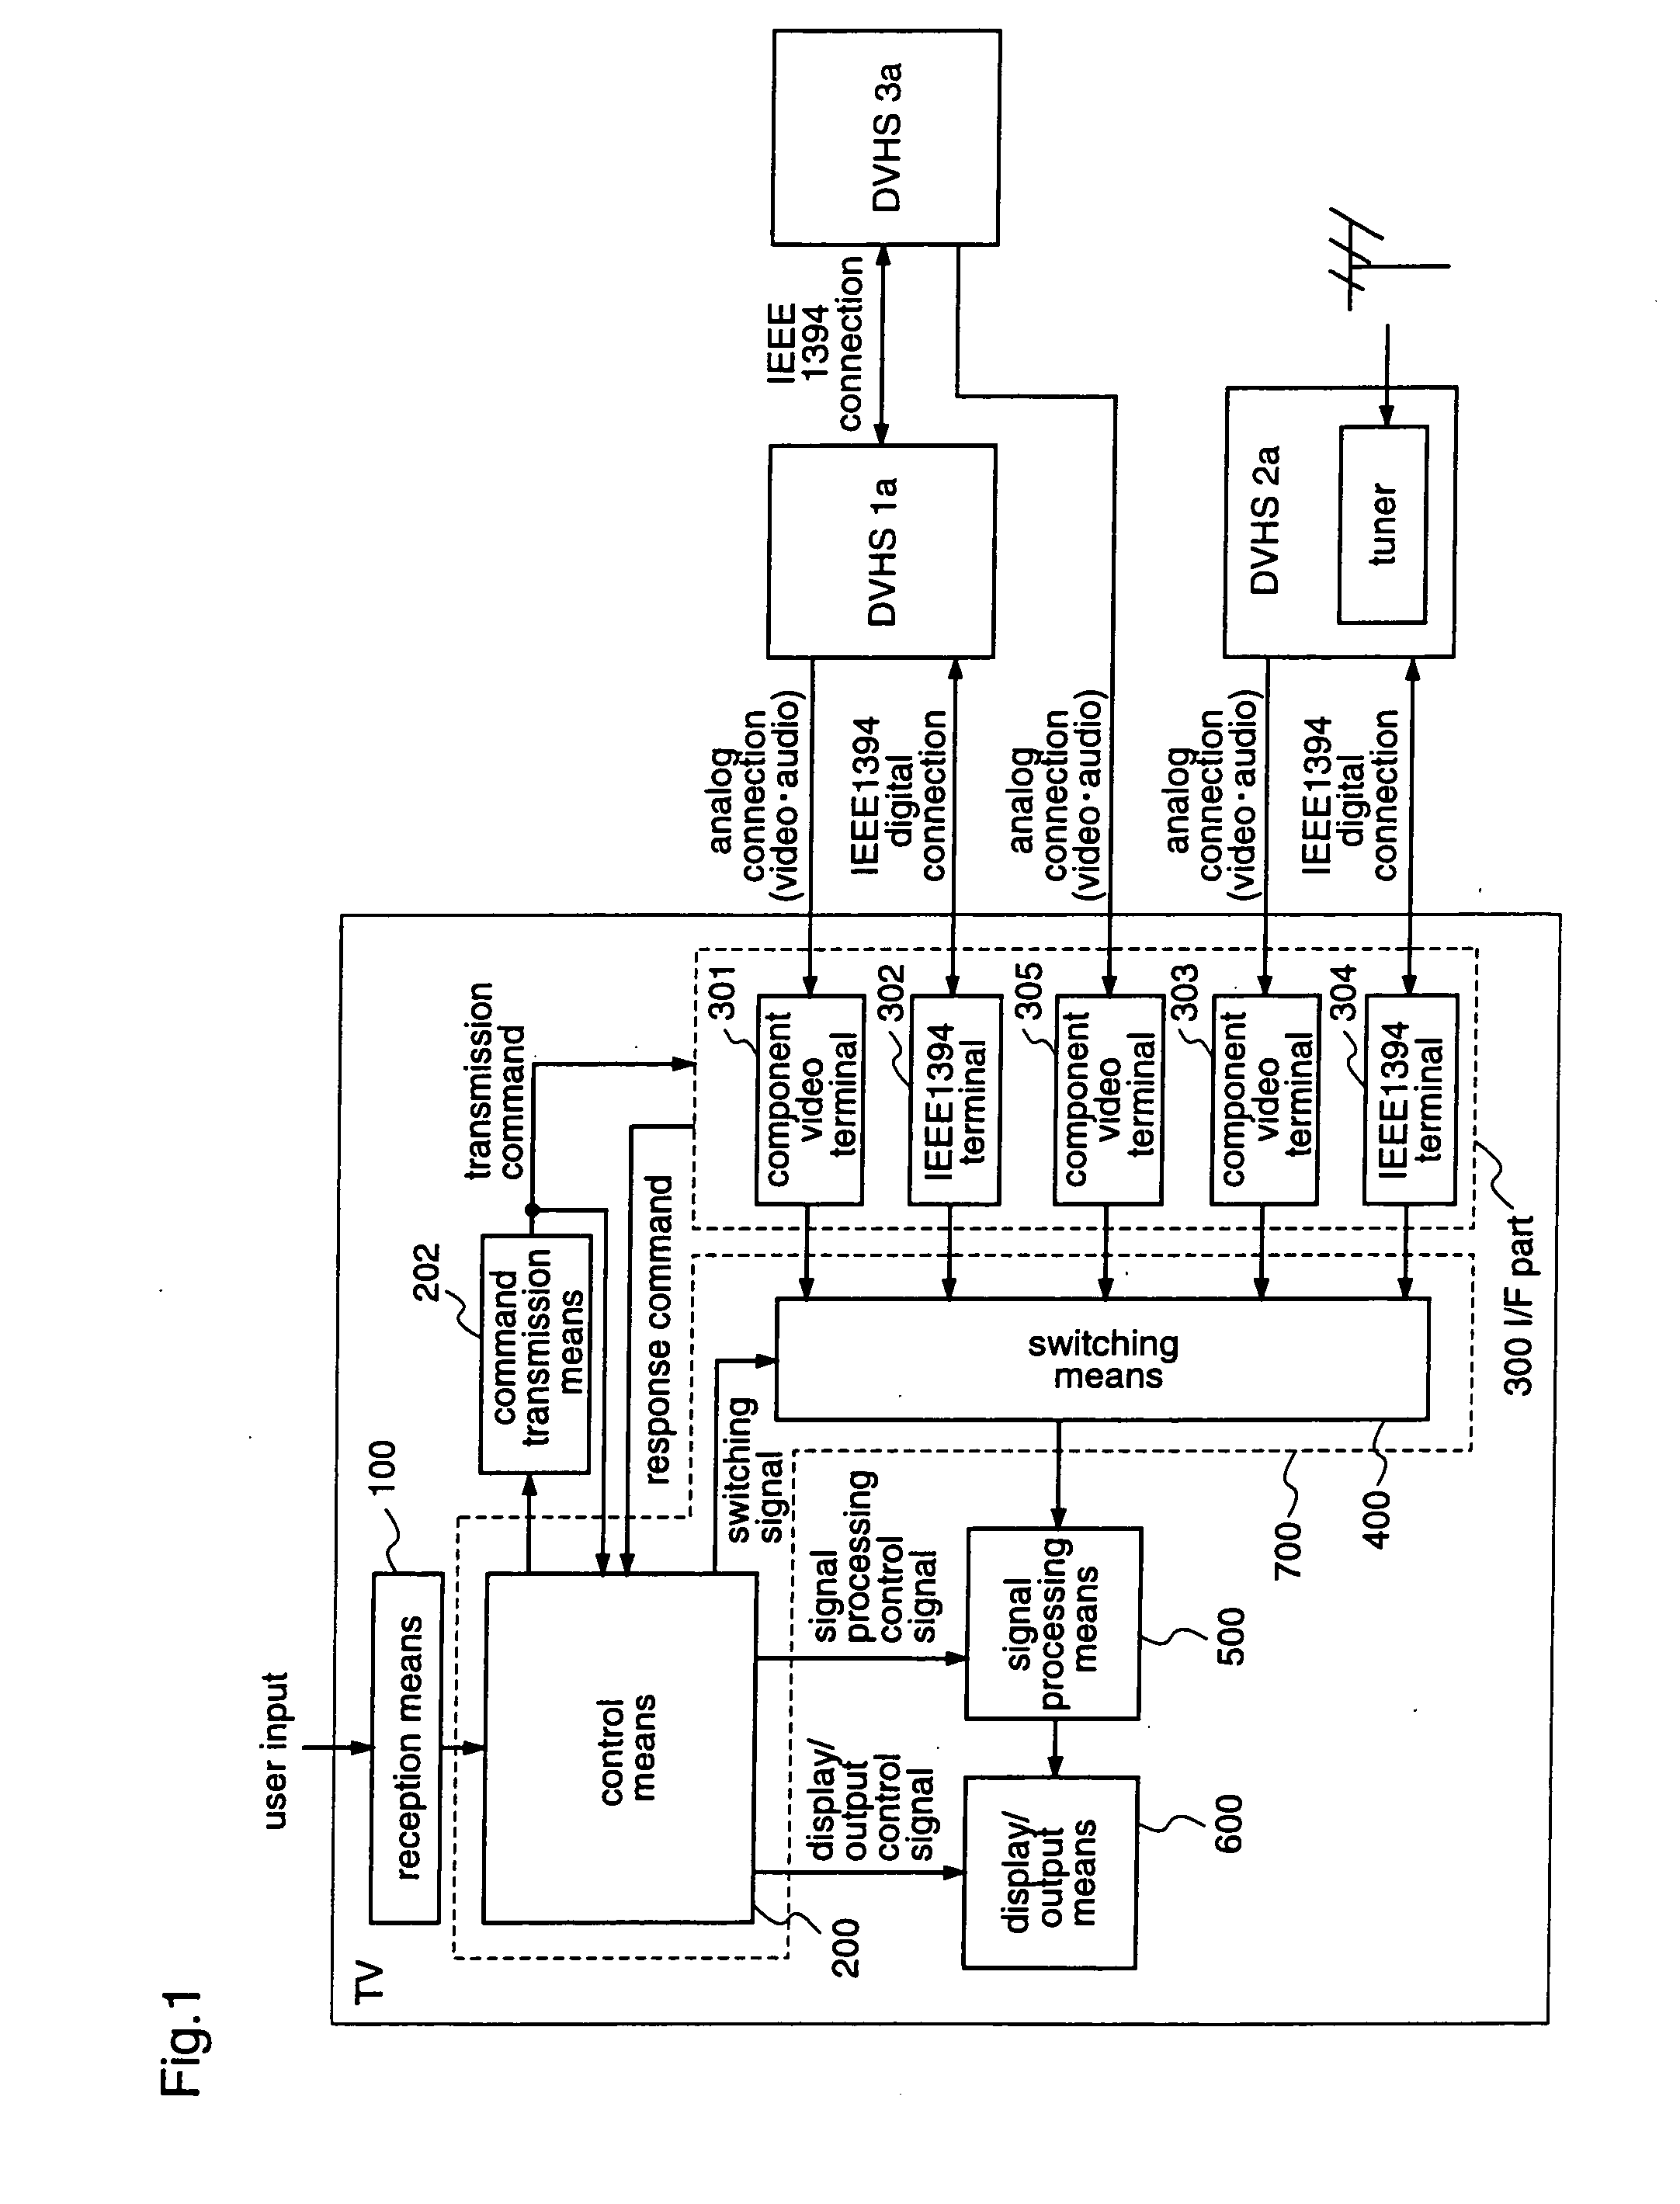 Television receiver and external devices